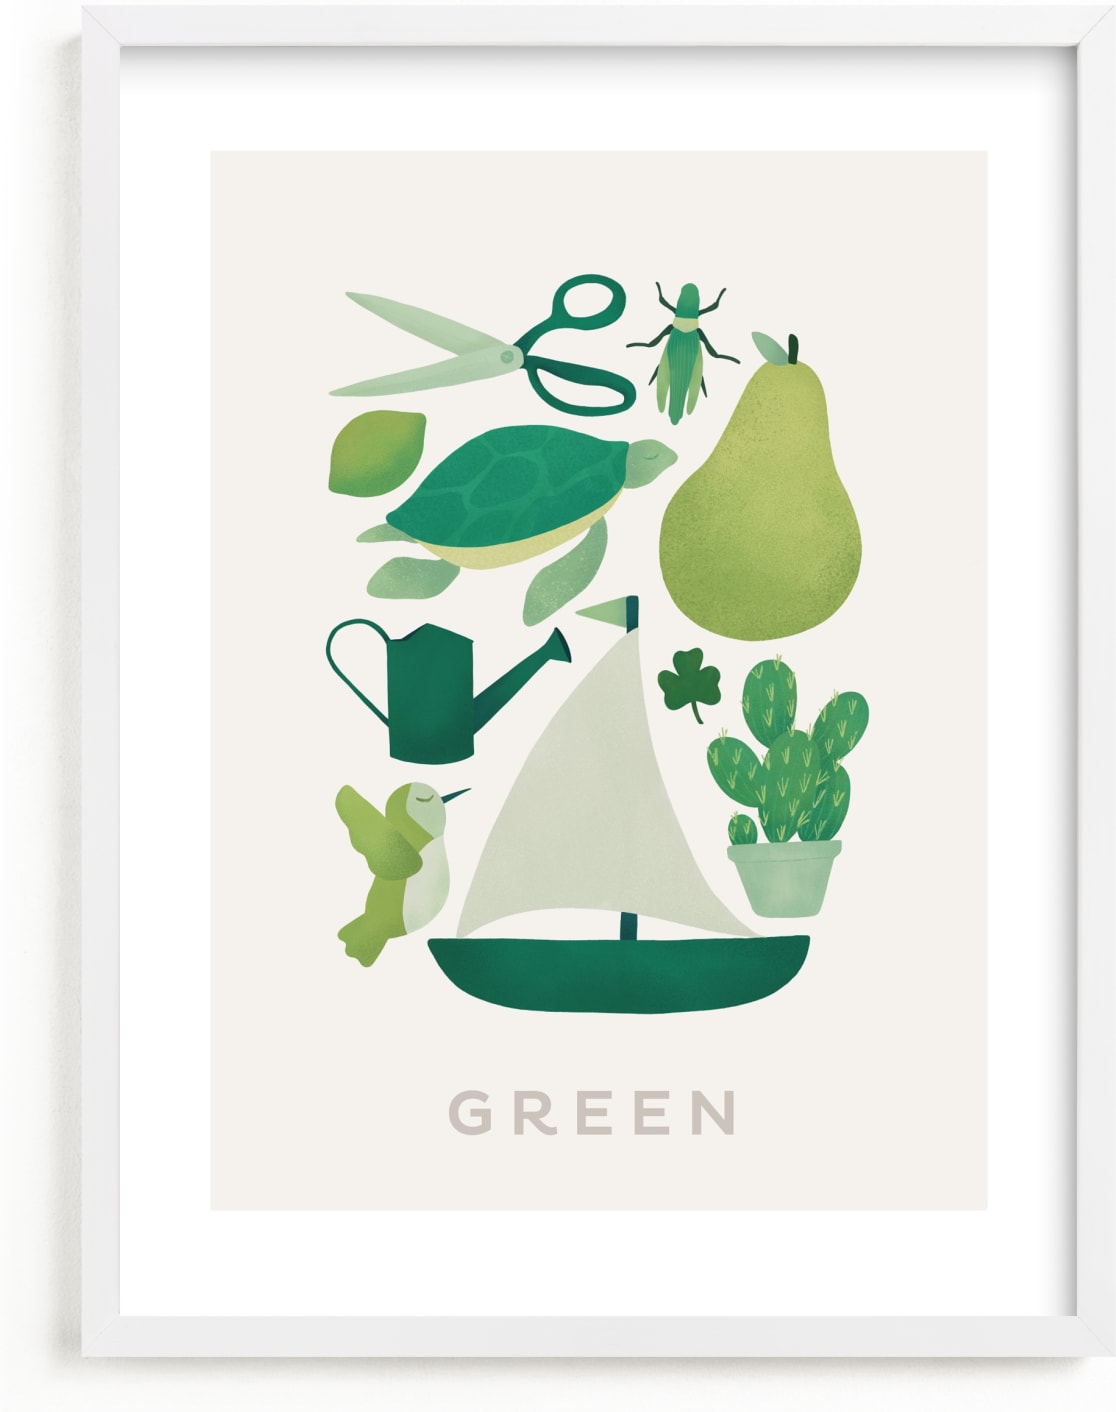 This is a green kids wall art by Ana Peake called Ten Green Things.